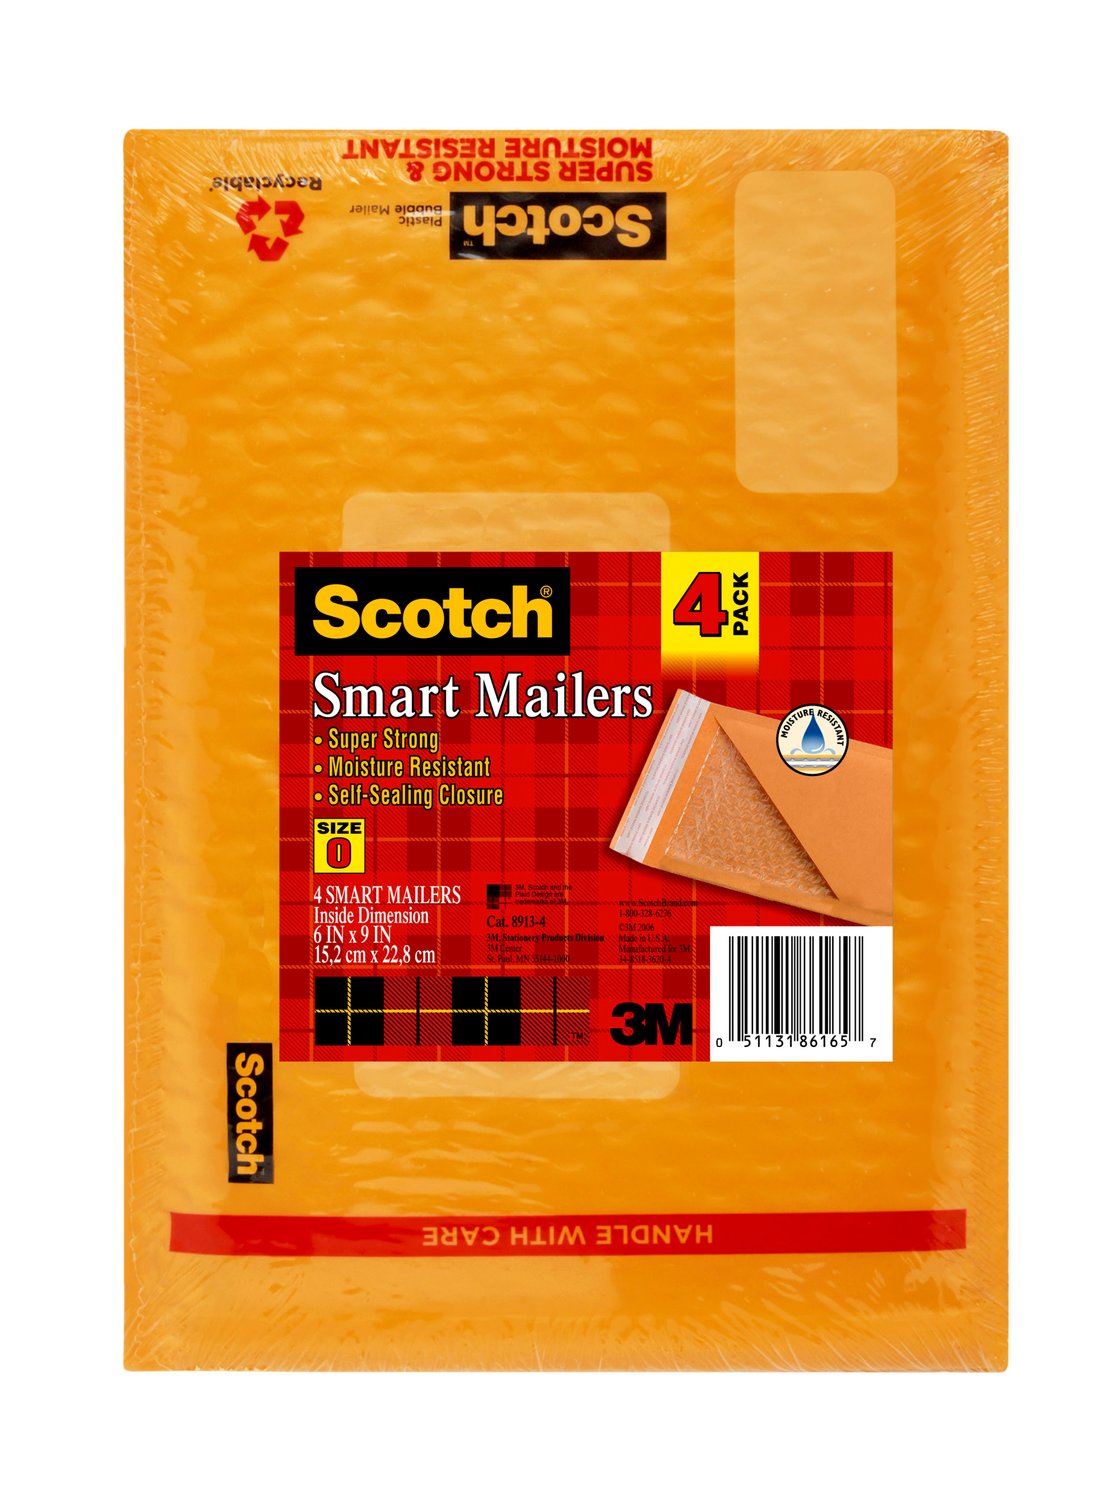 7010311823 - Scotch Poly Bubble Mailer 4-Pack, 8913-4, 6 in x 9.25 in Size #0, 12/4